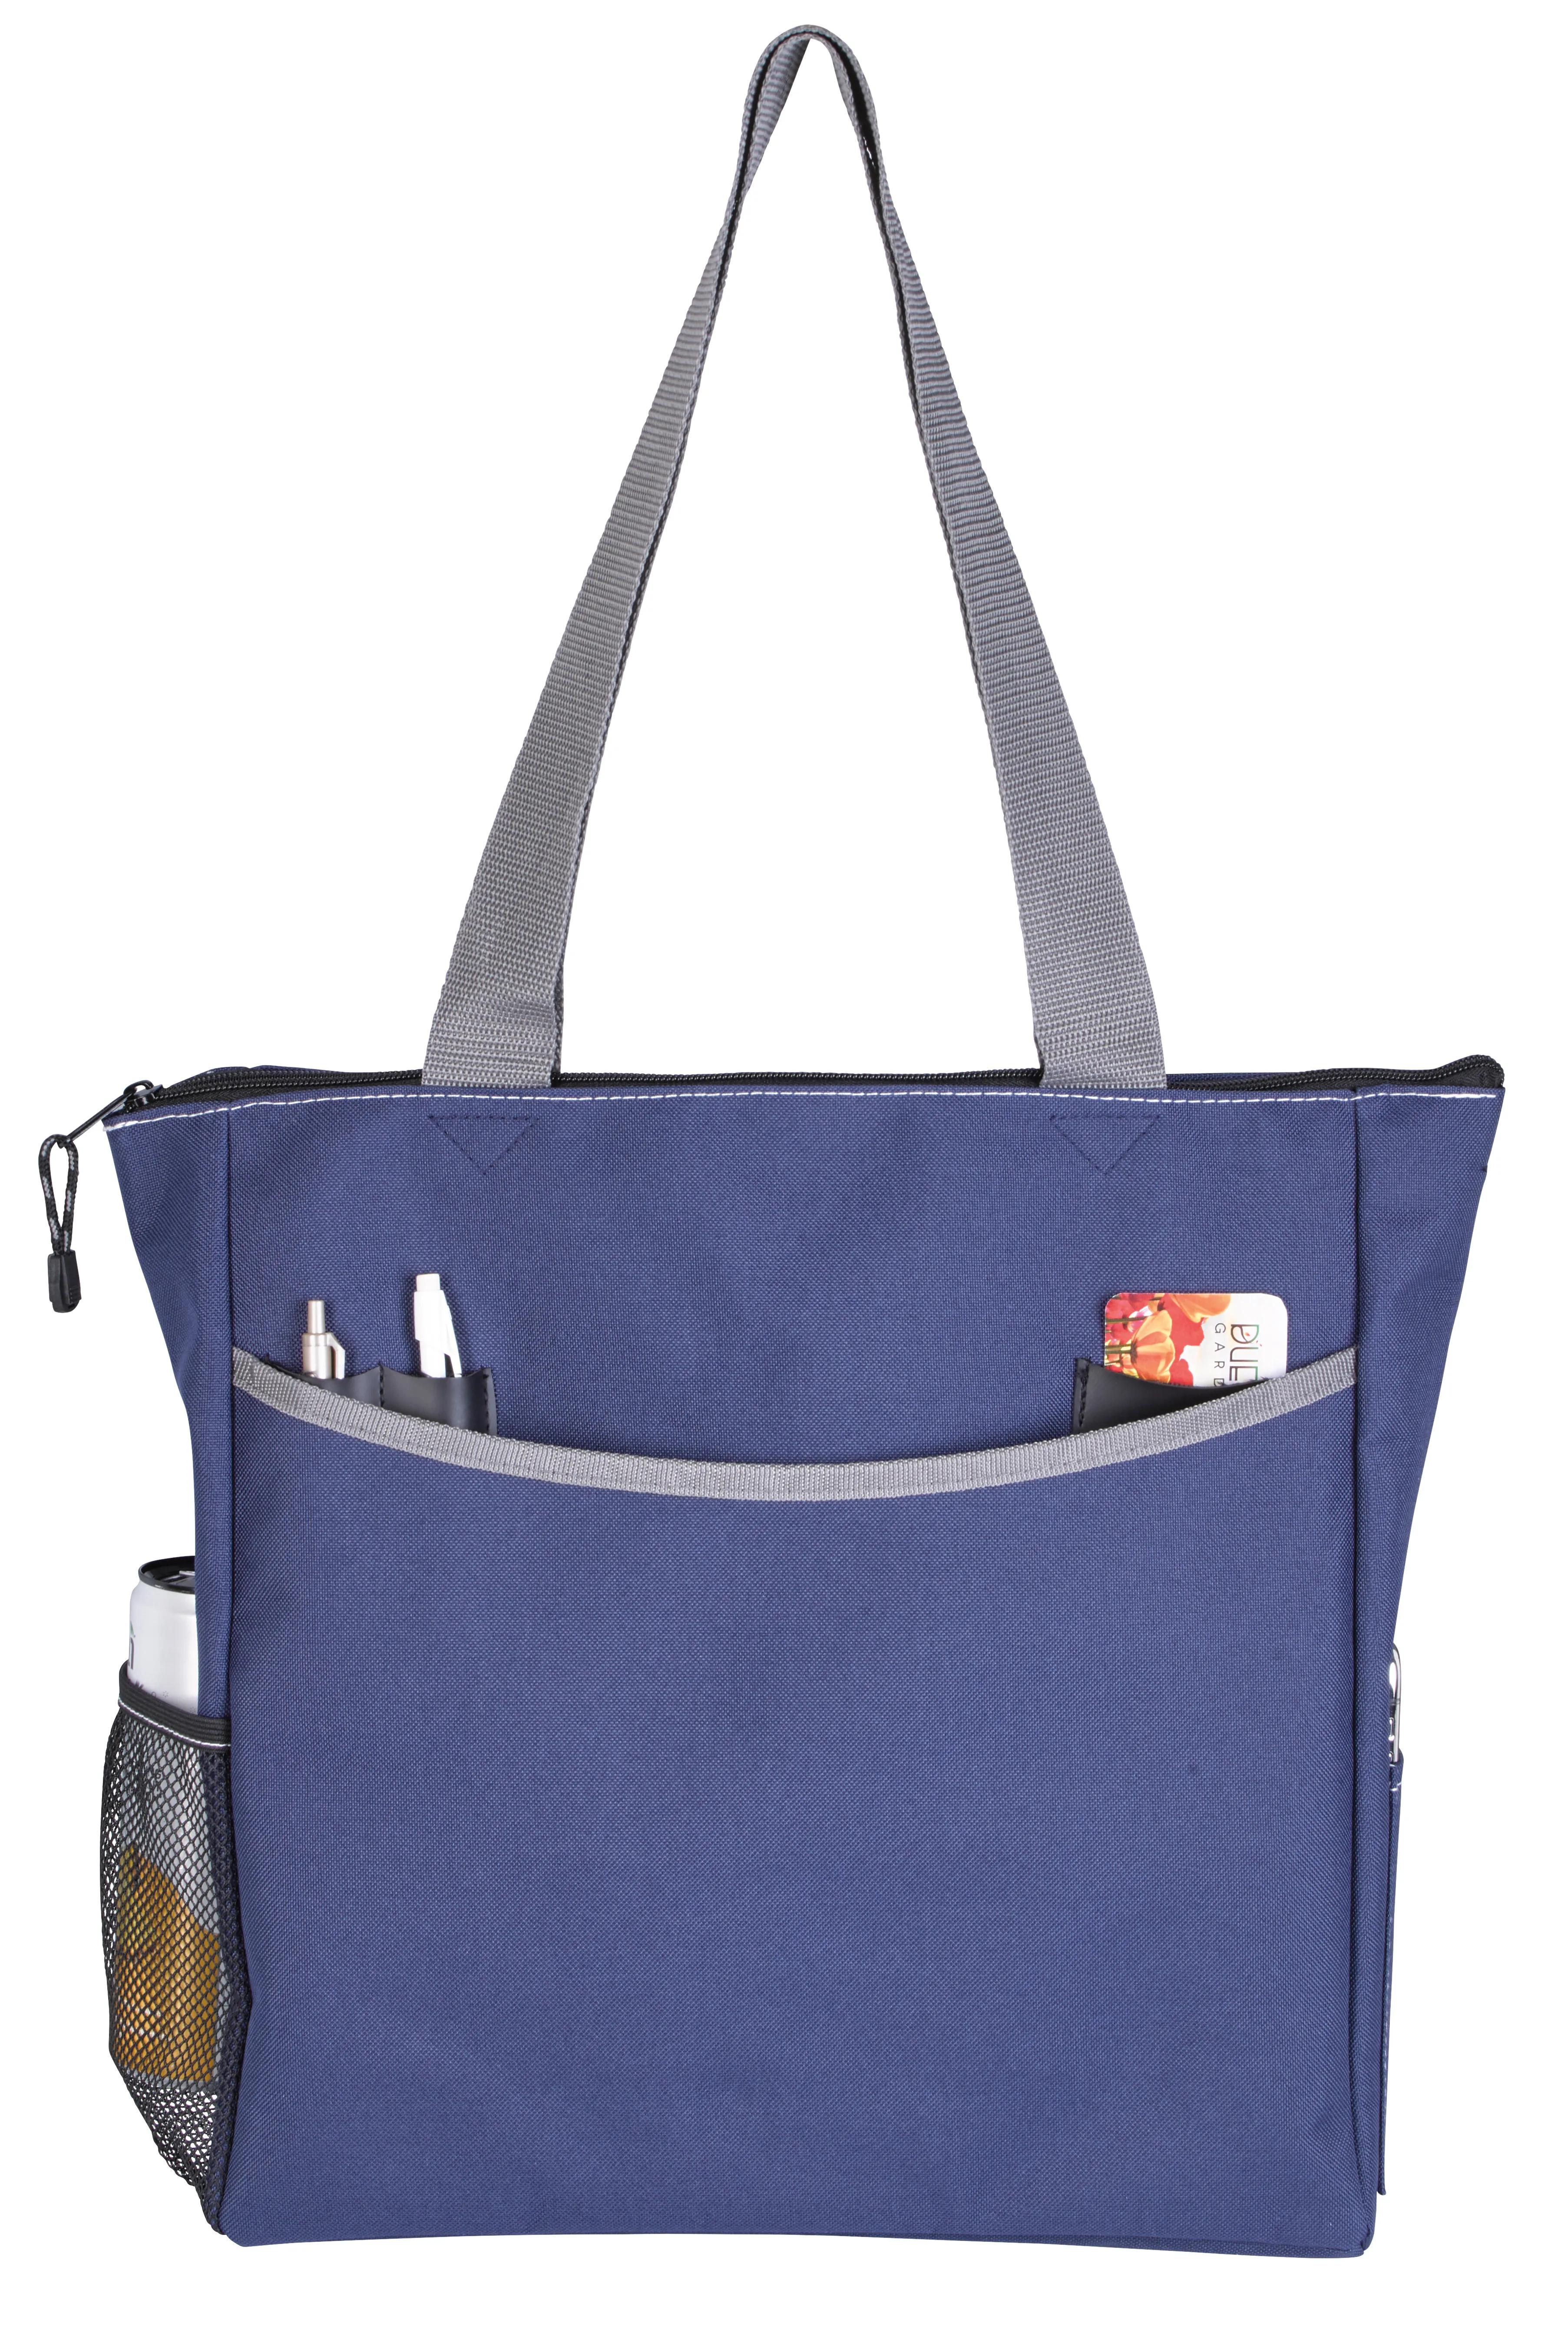 RPET Transport It Tote 9 of 20